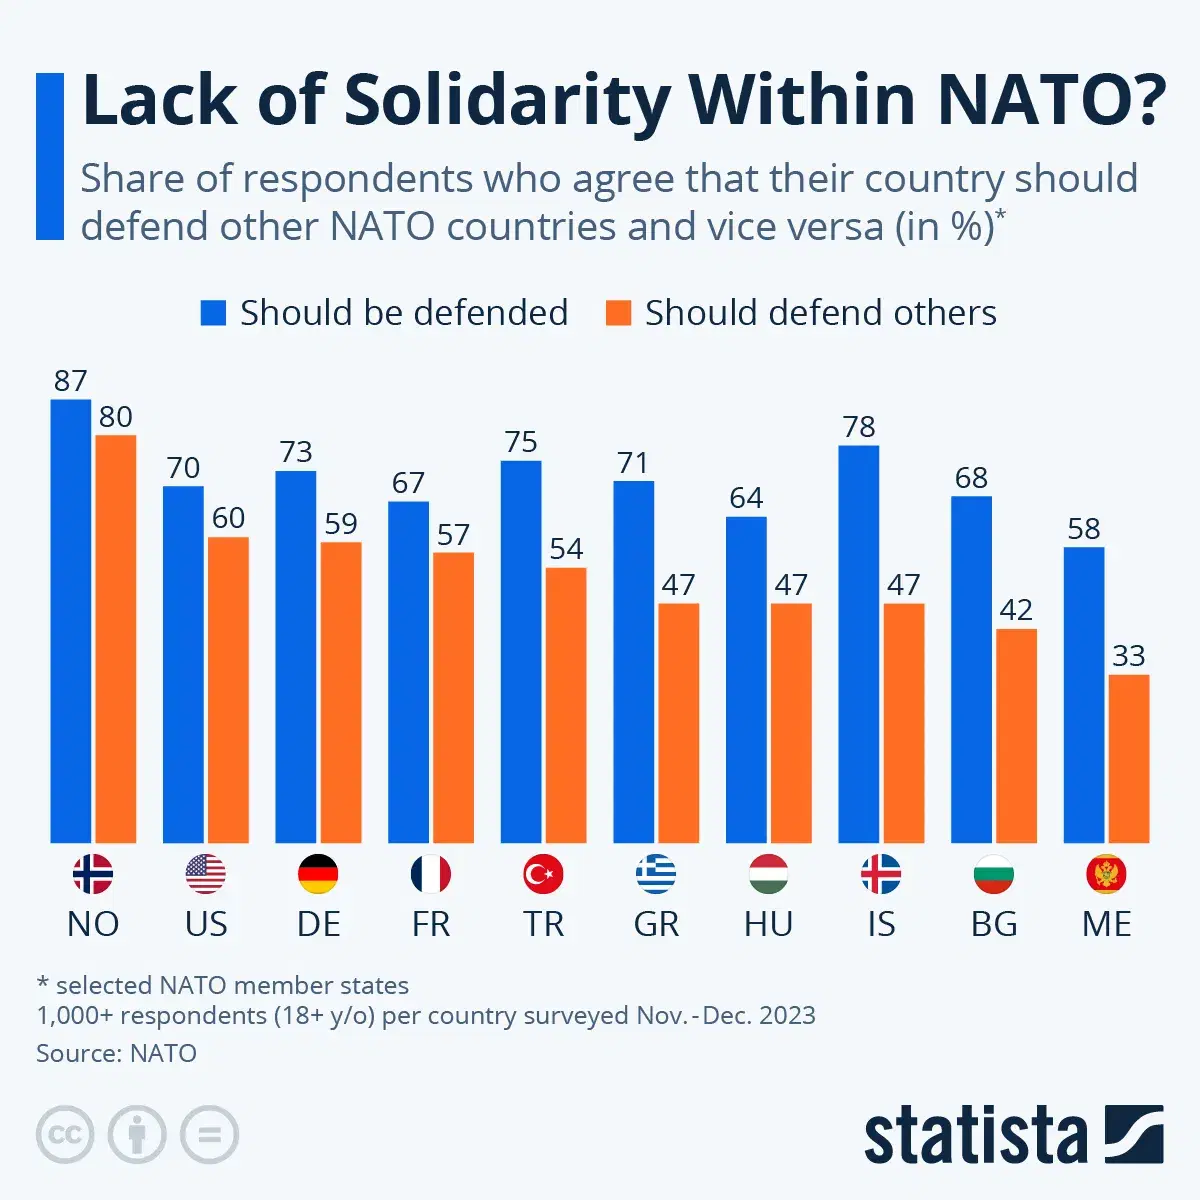 Lack of Solidarity Within NATO?